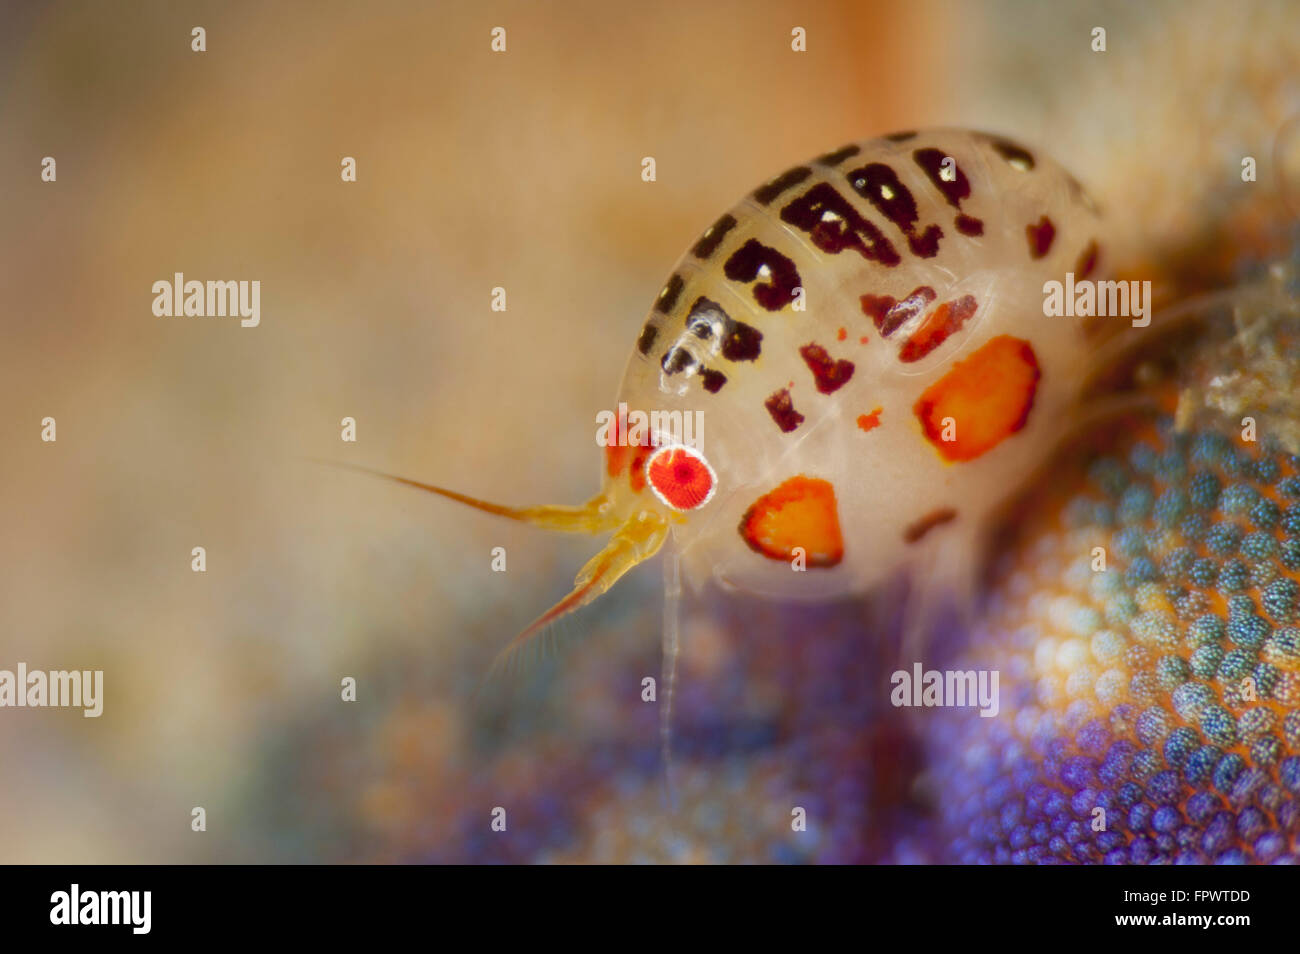 Ladybug amphipod, Cyproidea species, side view, taken at Cannibal Rock, Komodo National Park, Indonesia. Stock Photo